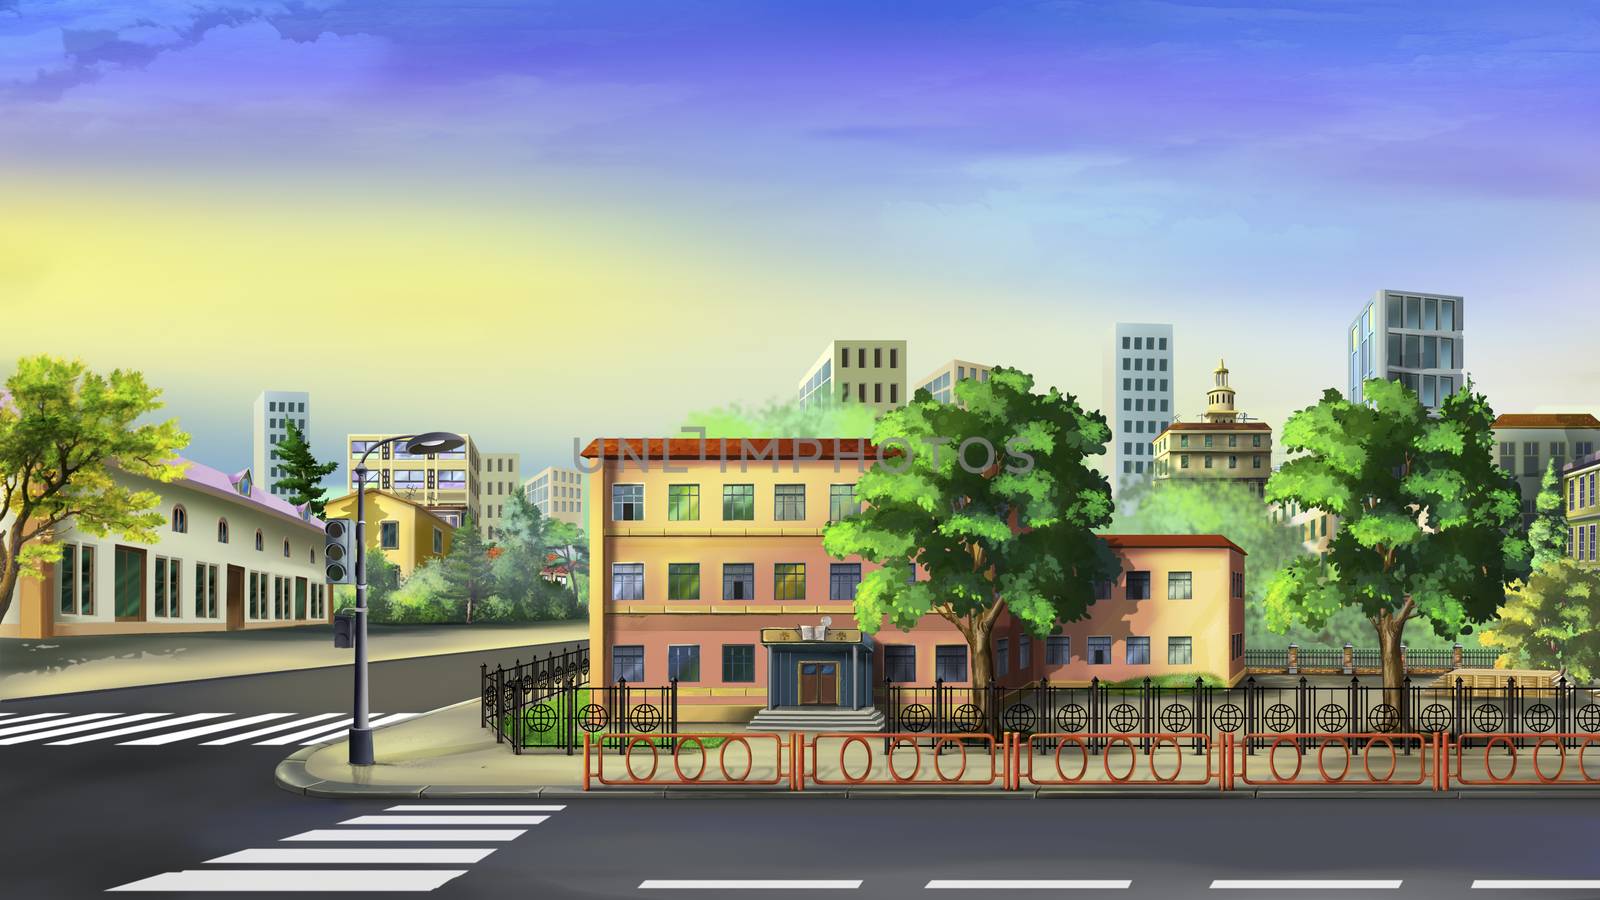 Digital painting of the cityscape in a summer morning.